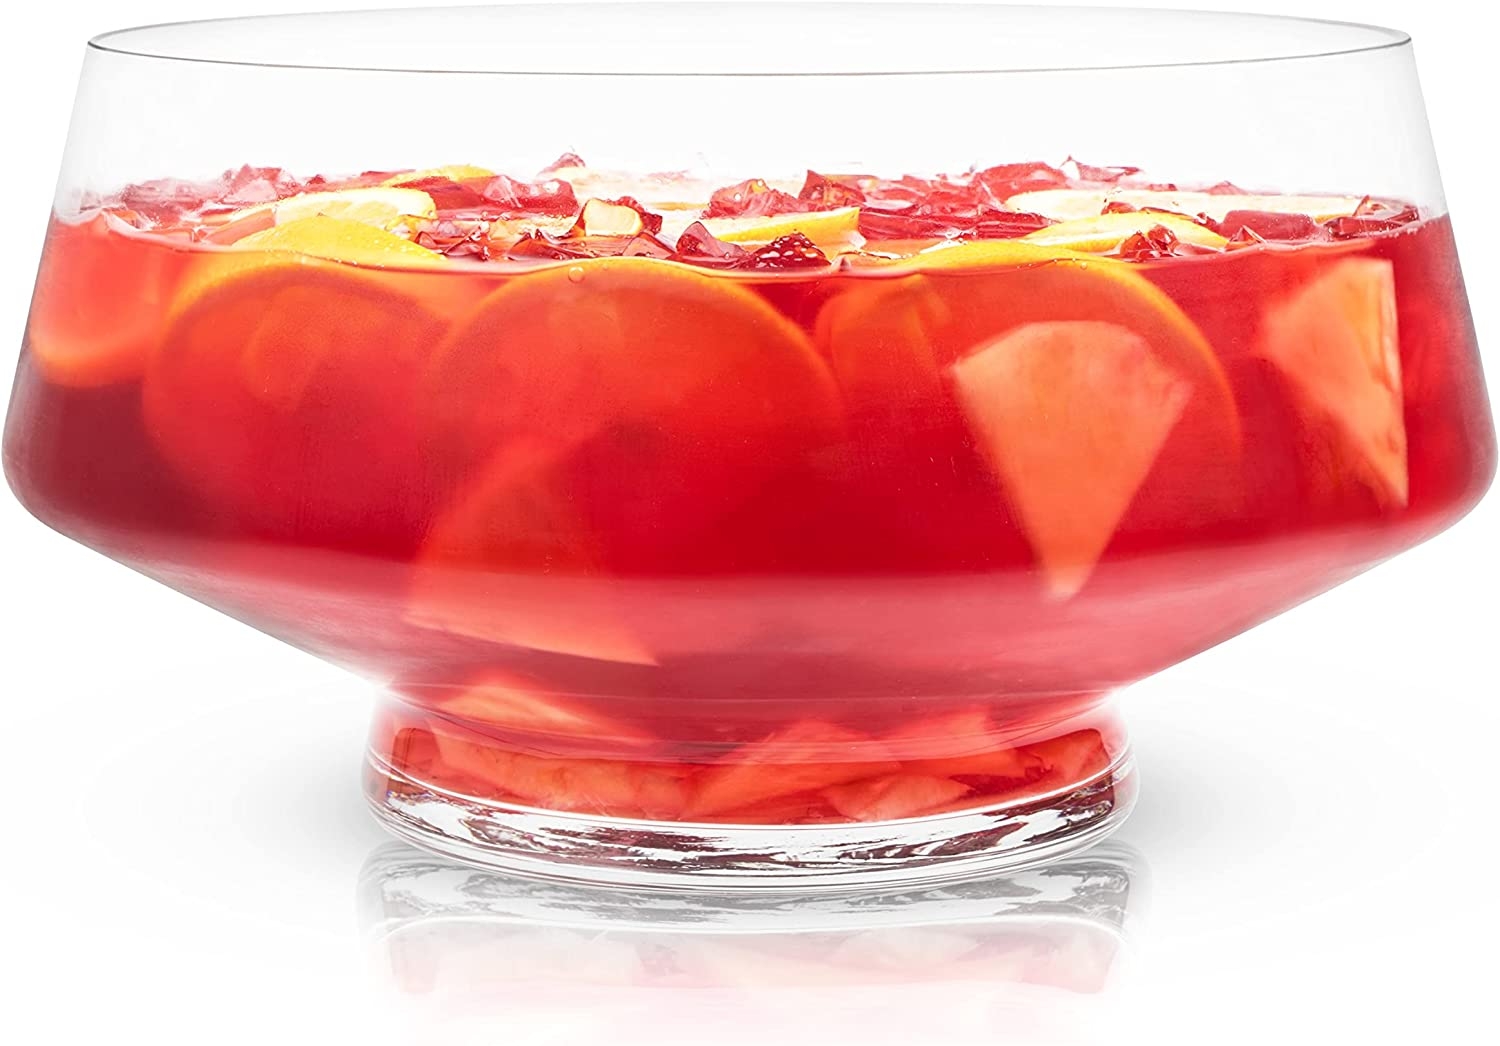 Party Punch Bowl on Amazon